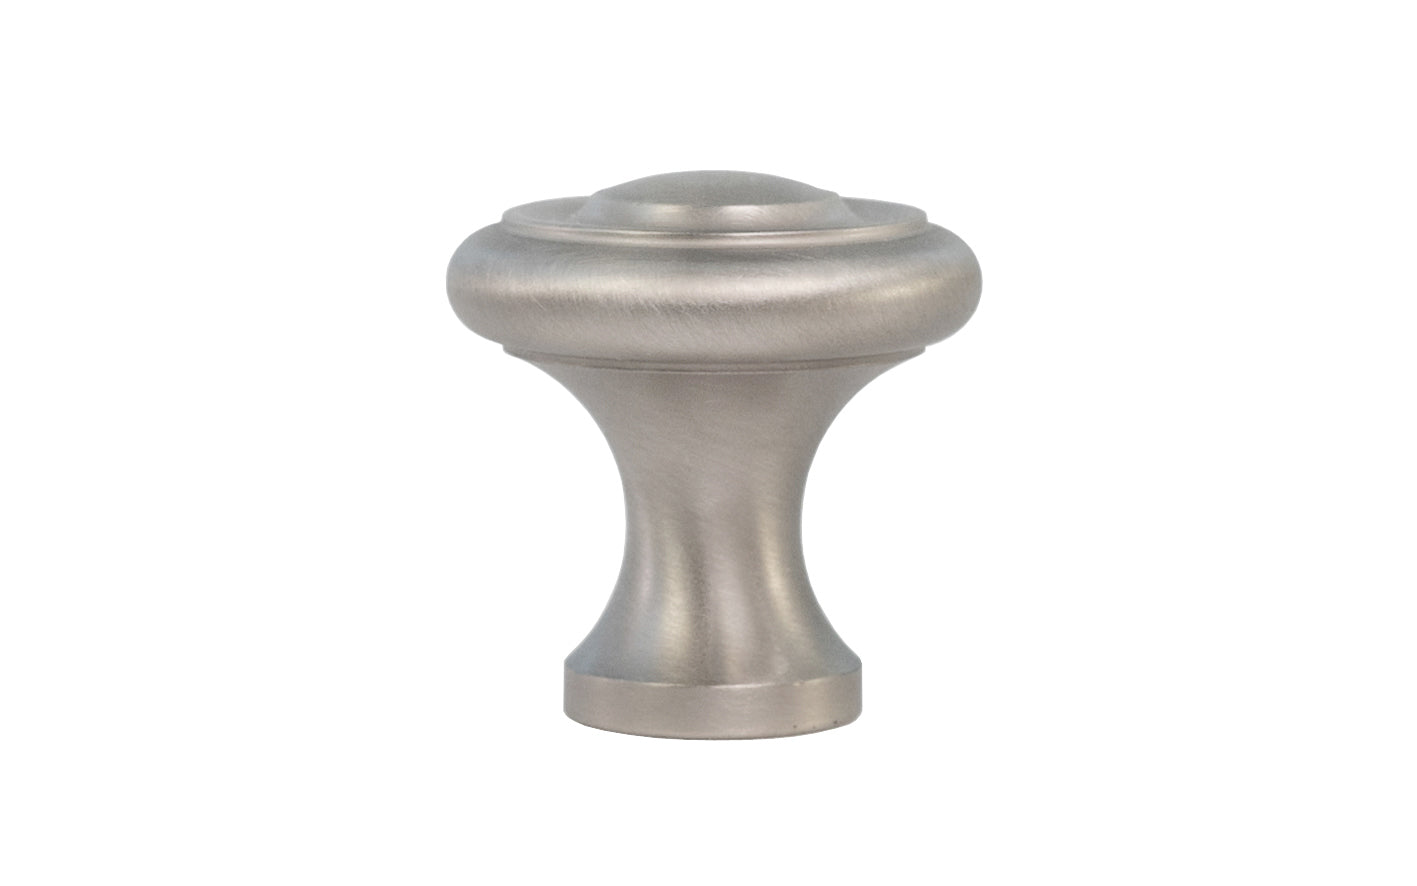 Vintage-style Hardware · Solid Brass classic contemporary / art deco, mid-century style cabinet knob. High quality solid brass 1" diameter Knob. Ideal for kitchen & bathroom cabinets, & furniture. Brushed nickel finish.